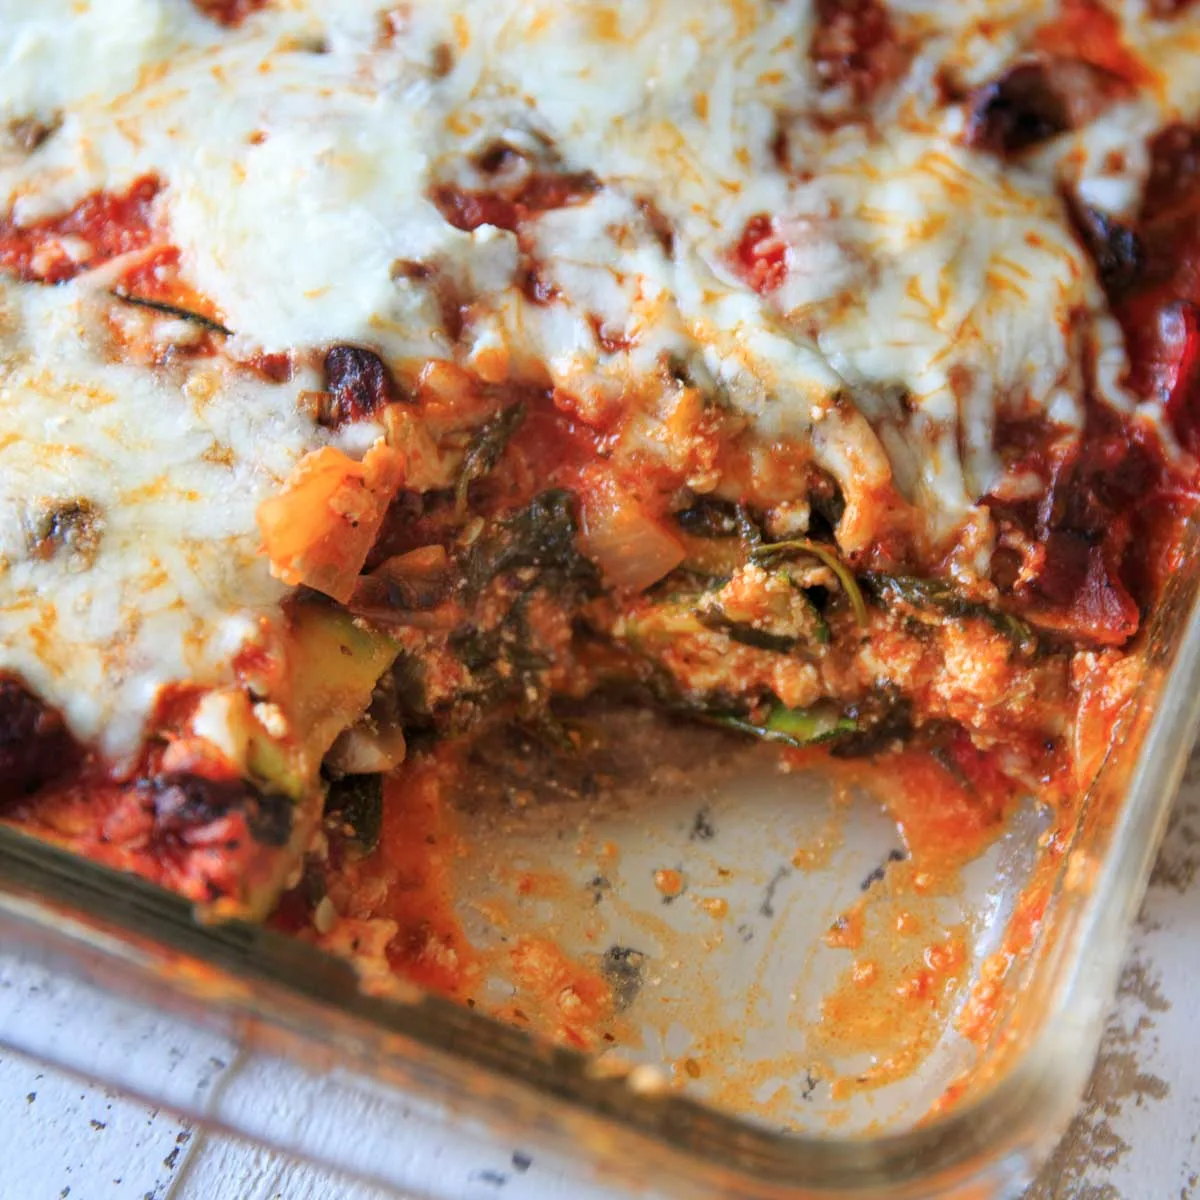 a corner piece missing from the casserole dish of gluten-free zucchini noodle vegetable lasagna